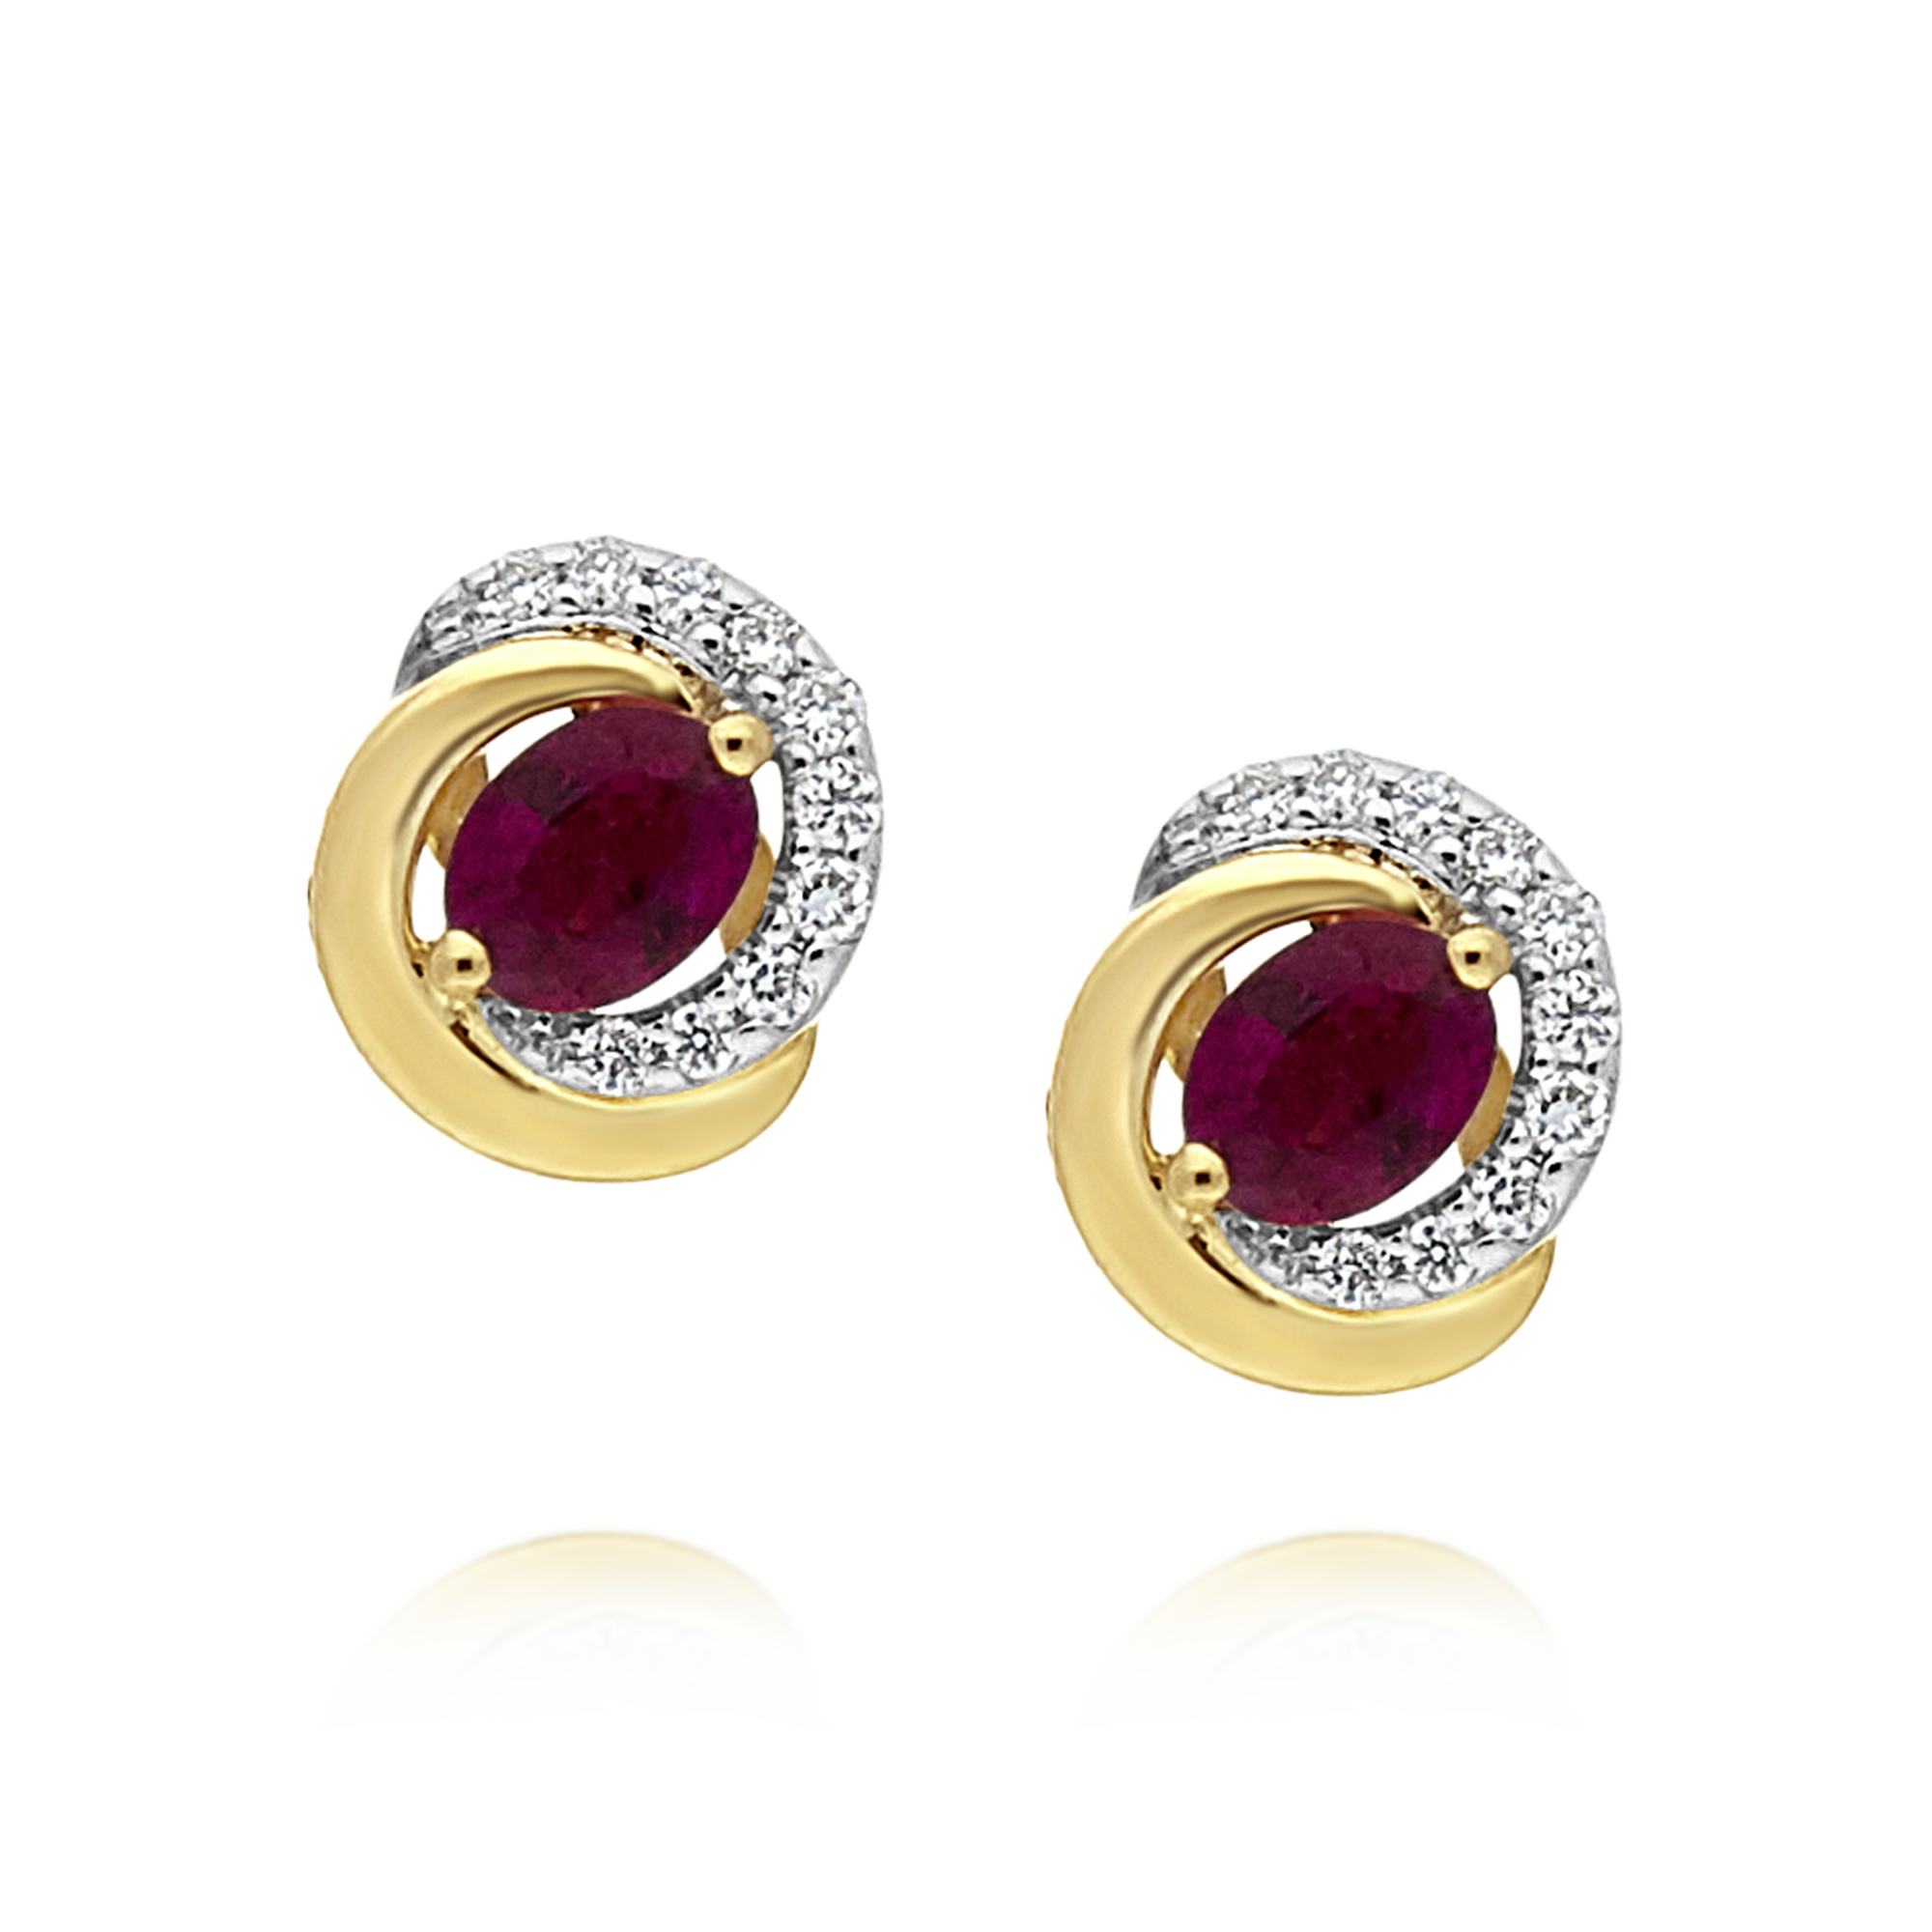 Ruby and Diamond Earrings, Yellow Gold